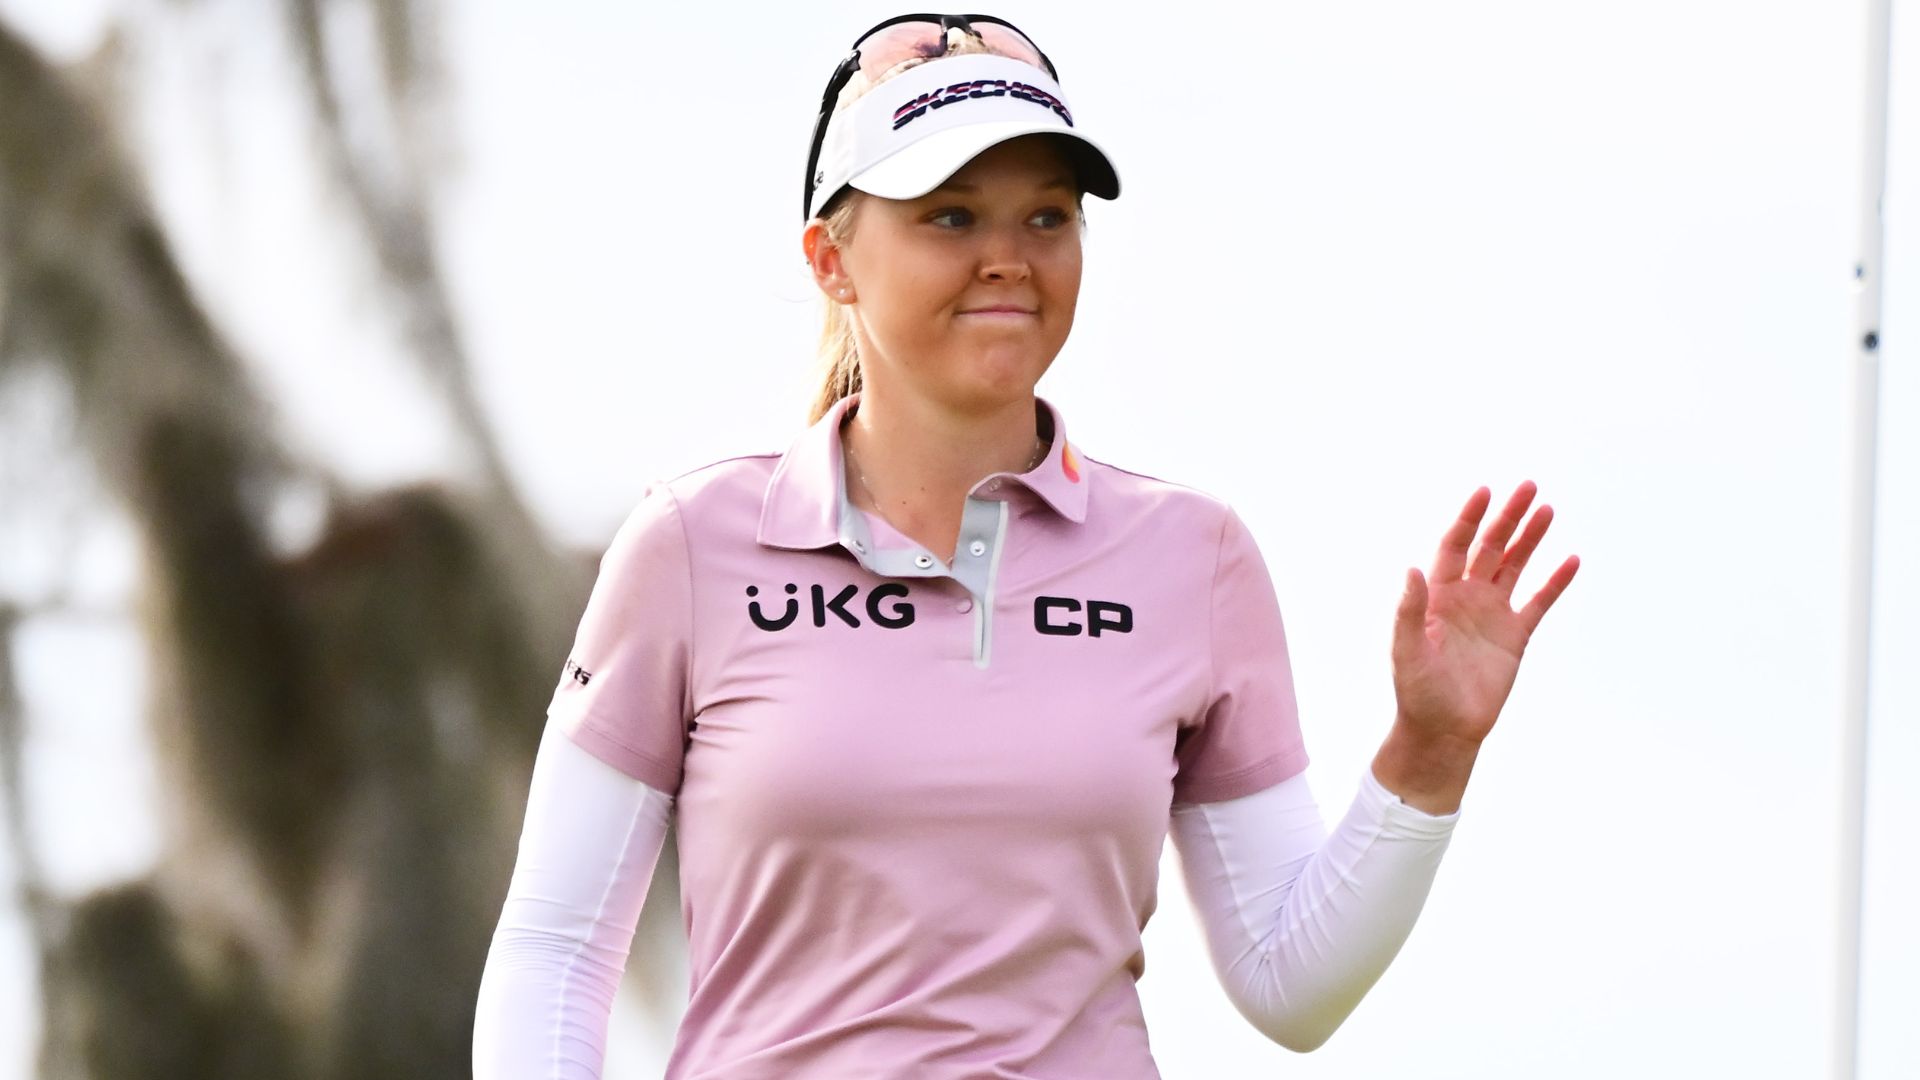 With last year’s back pain benign, Brooke Henderson holds opening Hilton Grand Vacations Tournament of Champions lead